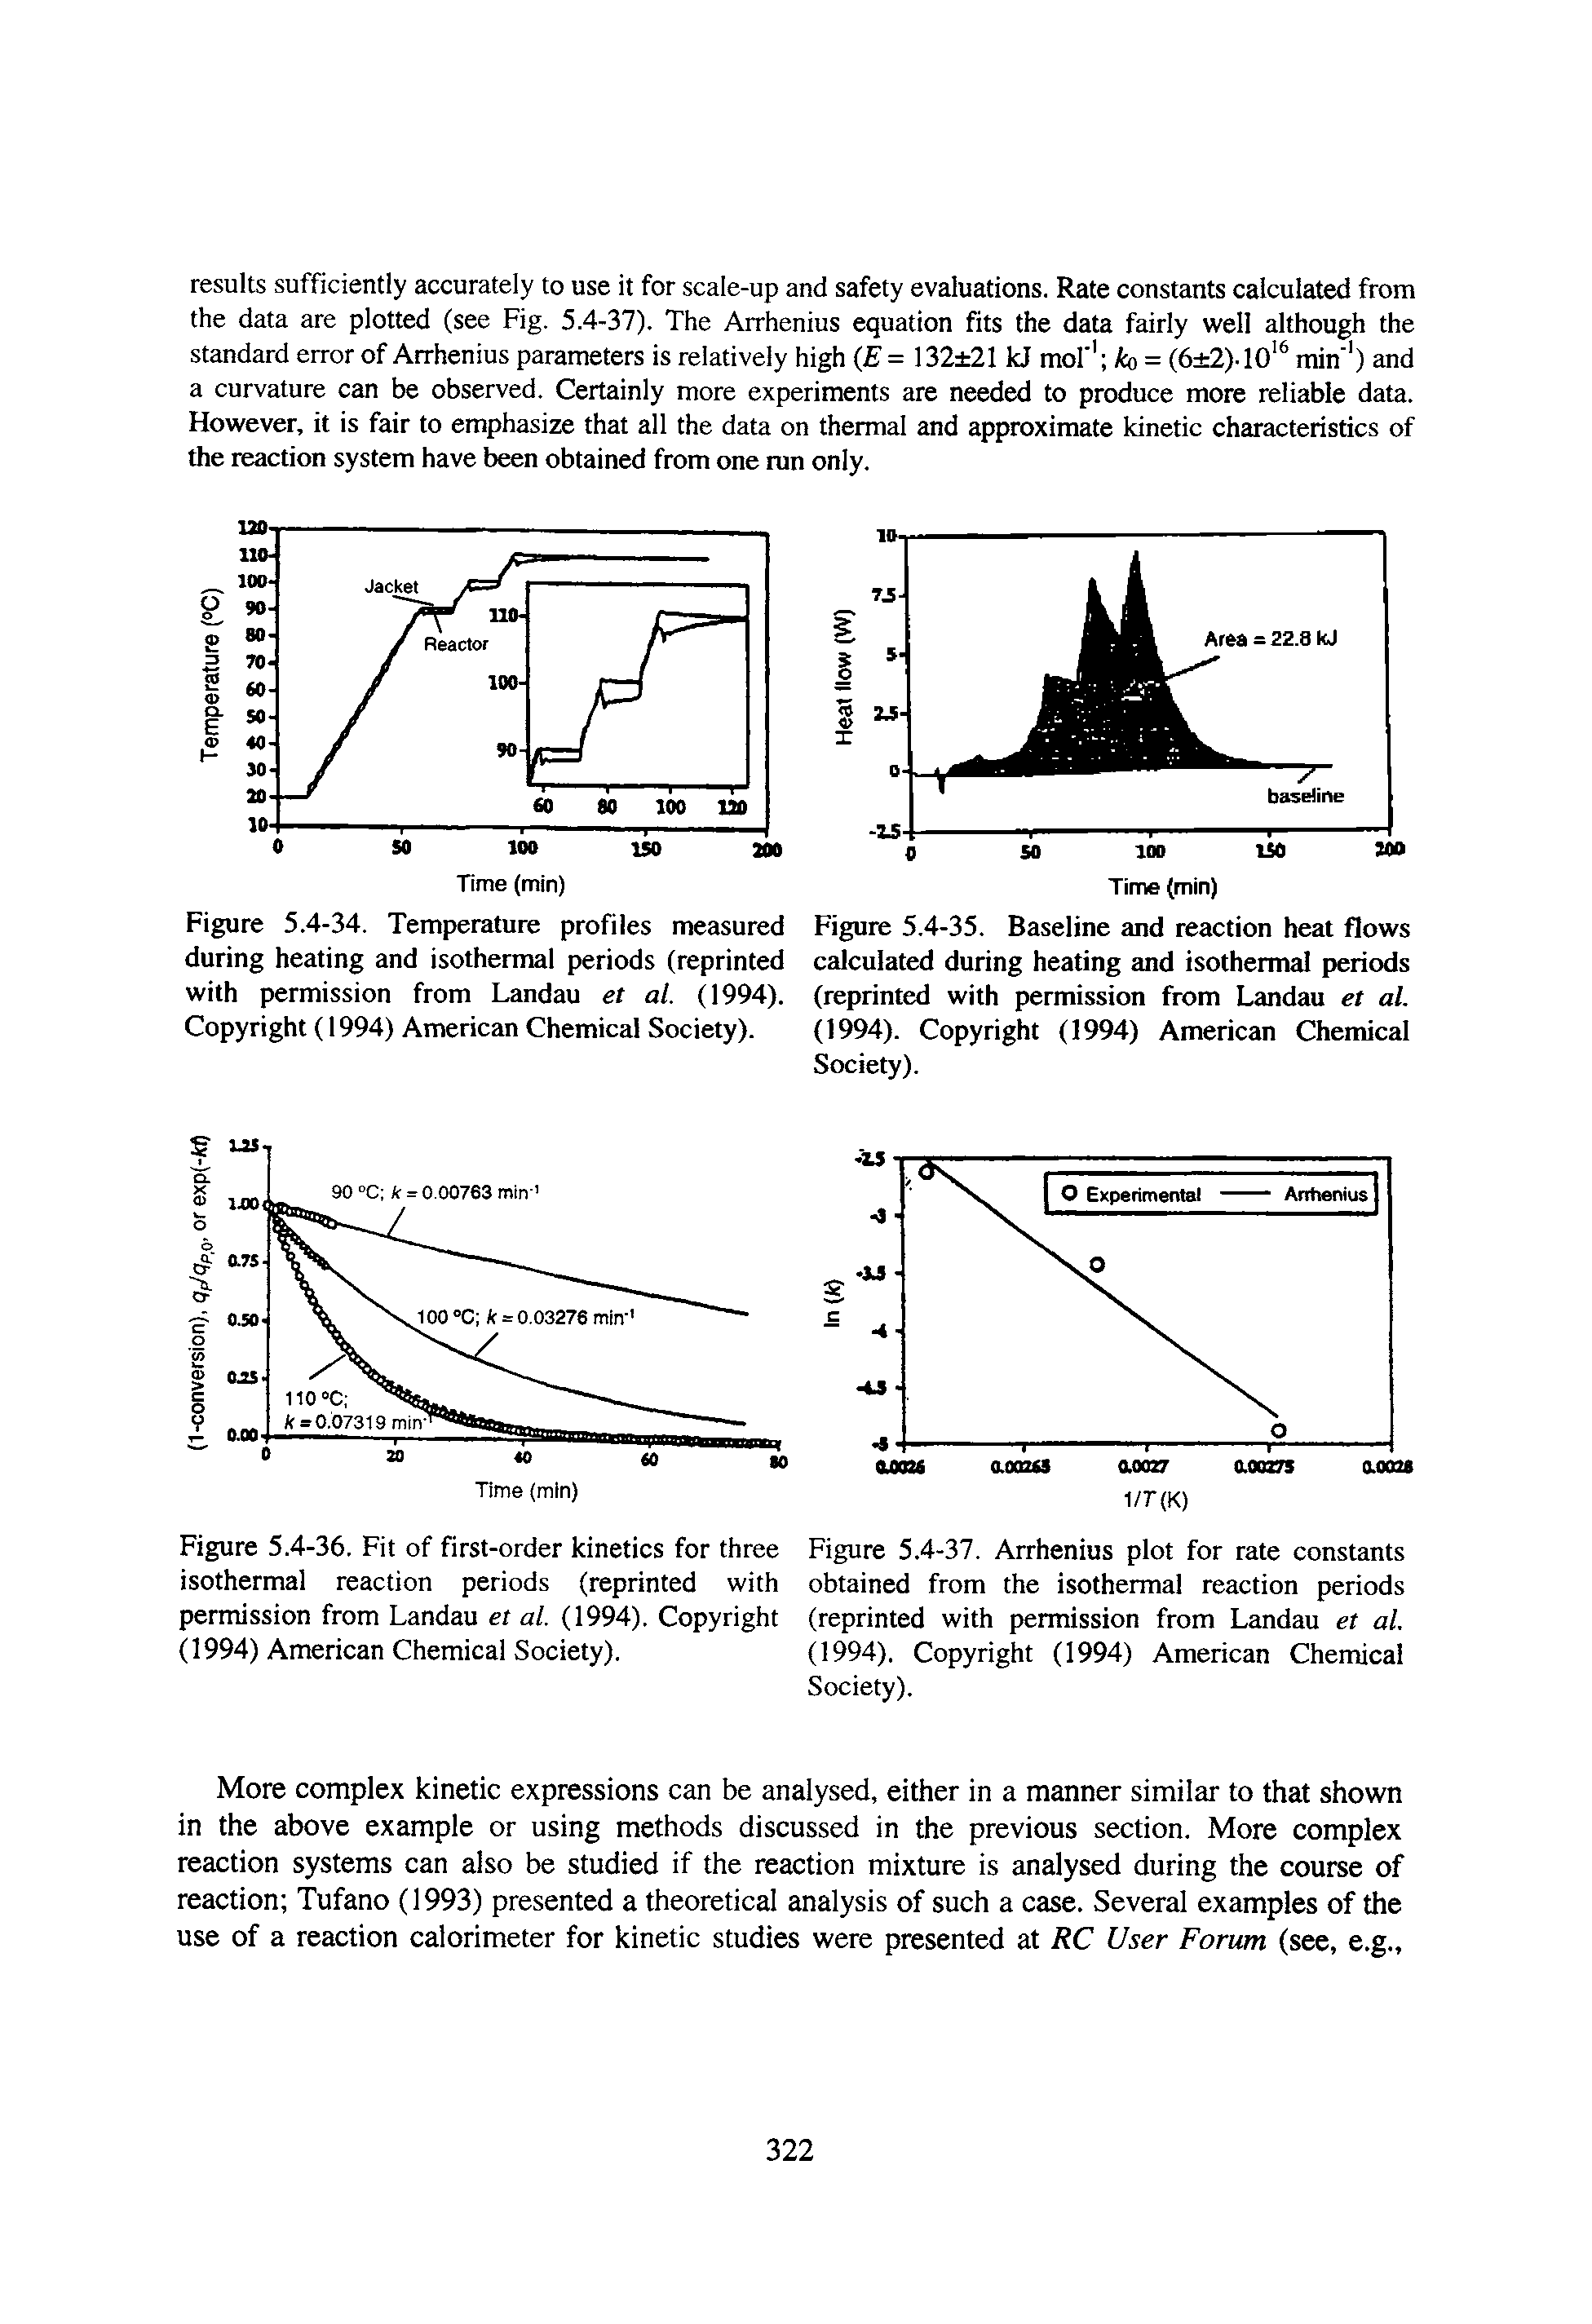 Figure 5.4-34. Temperature profiles measured during heating and isothermal periods (reprinted with permission from Landau et al. (1994). Copyright (1994) American Chemical Society).